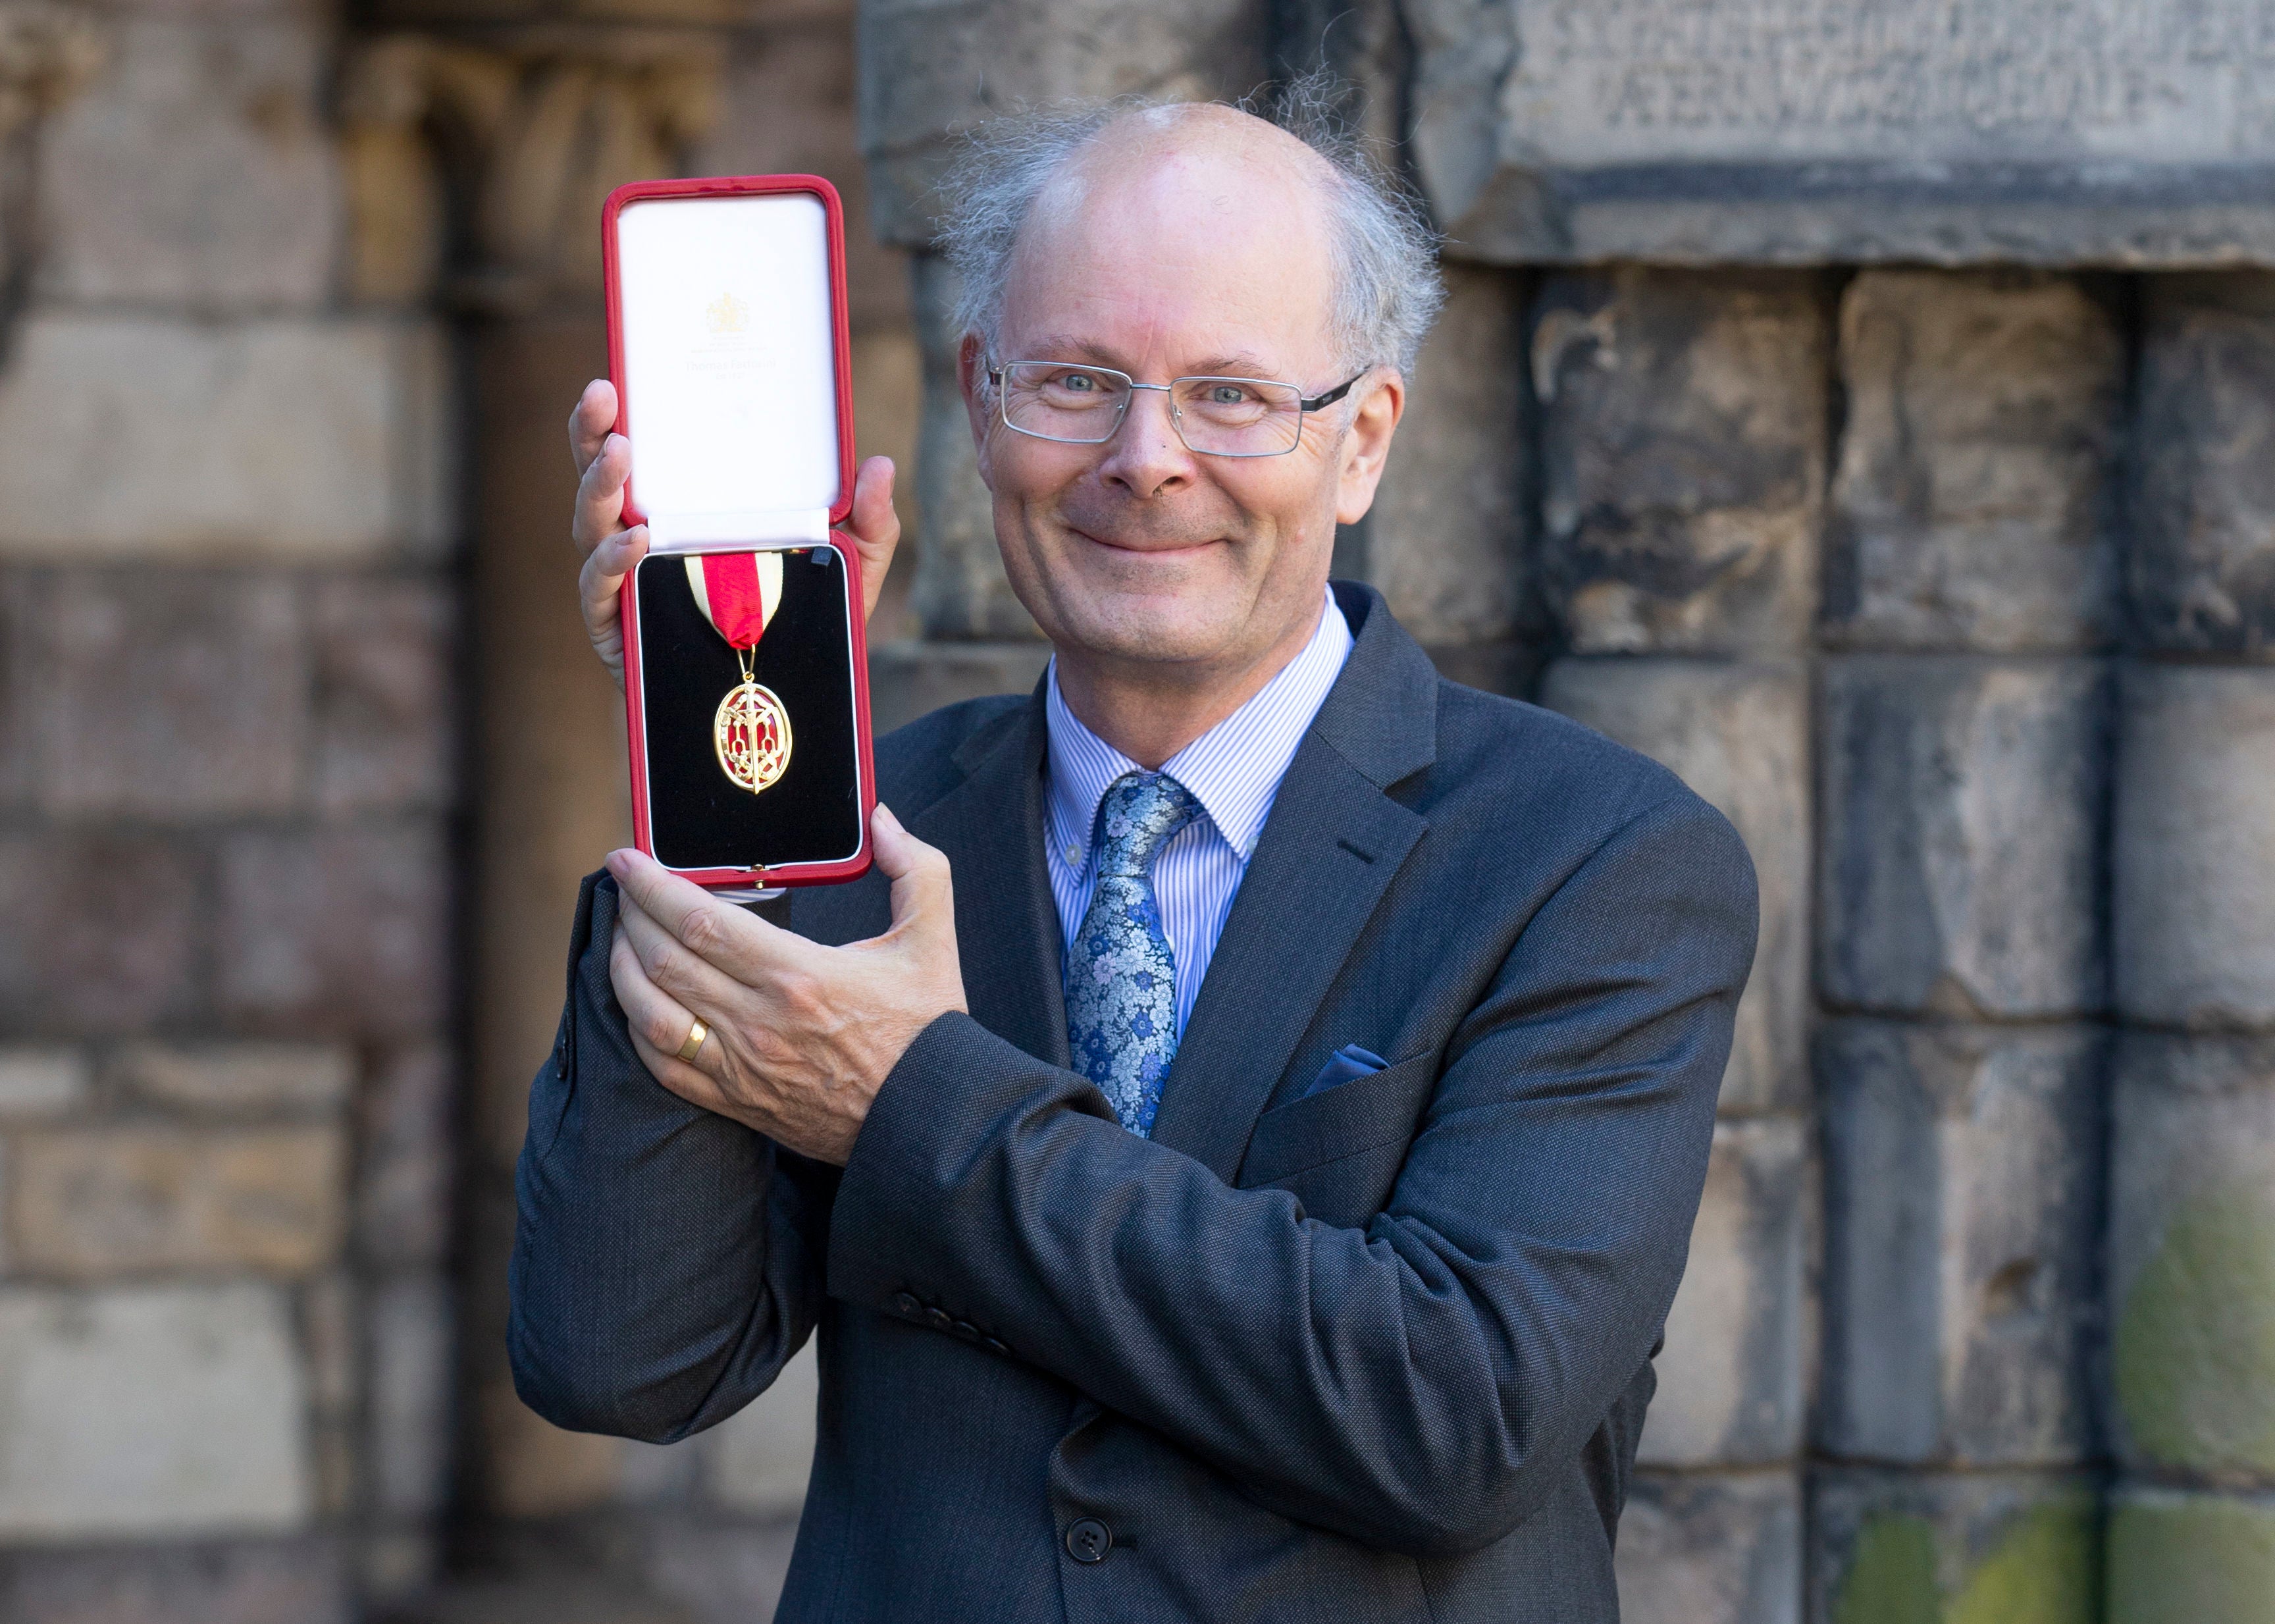 Sir John Curtice said tax cuts would not help Tory’s election chances